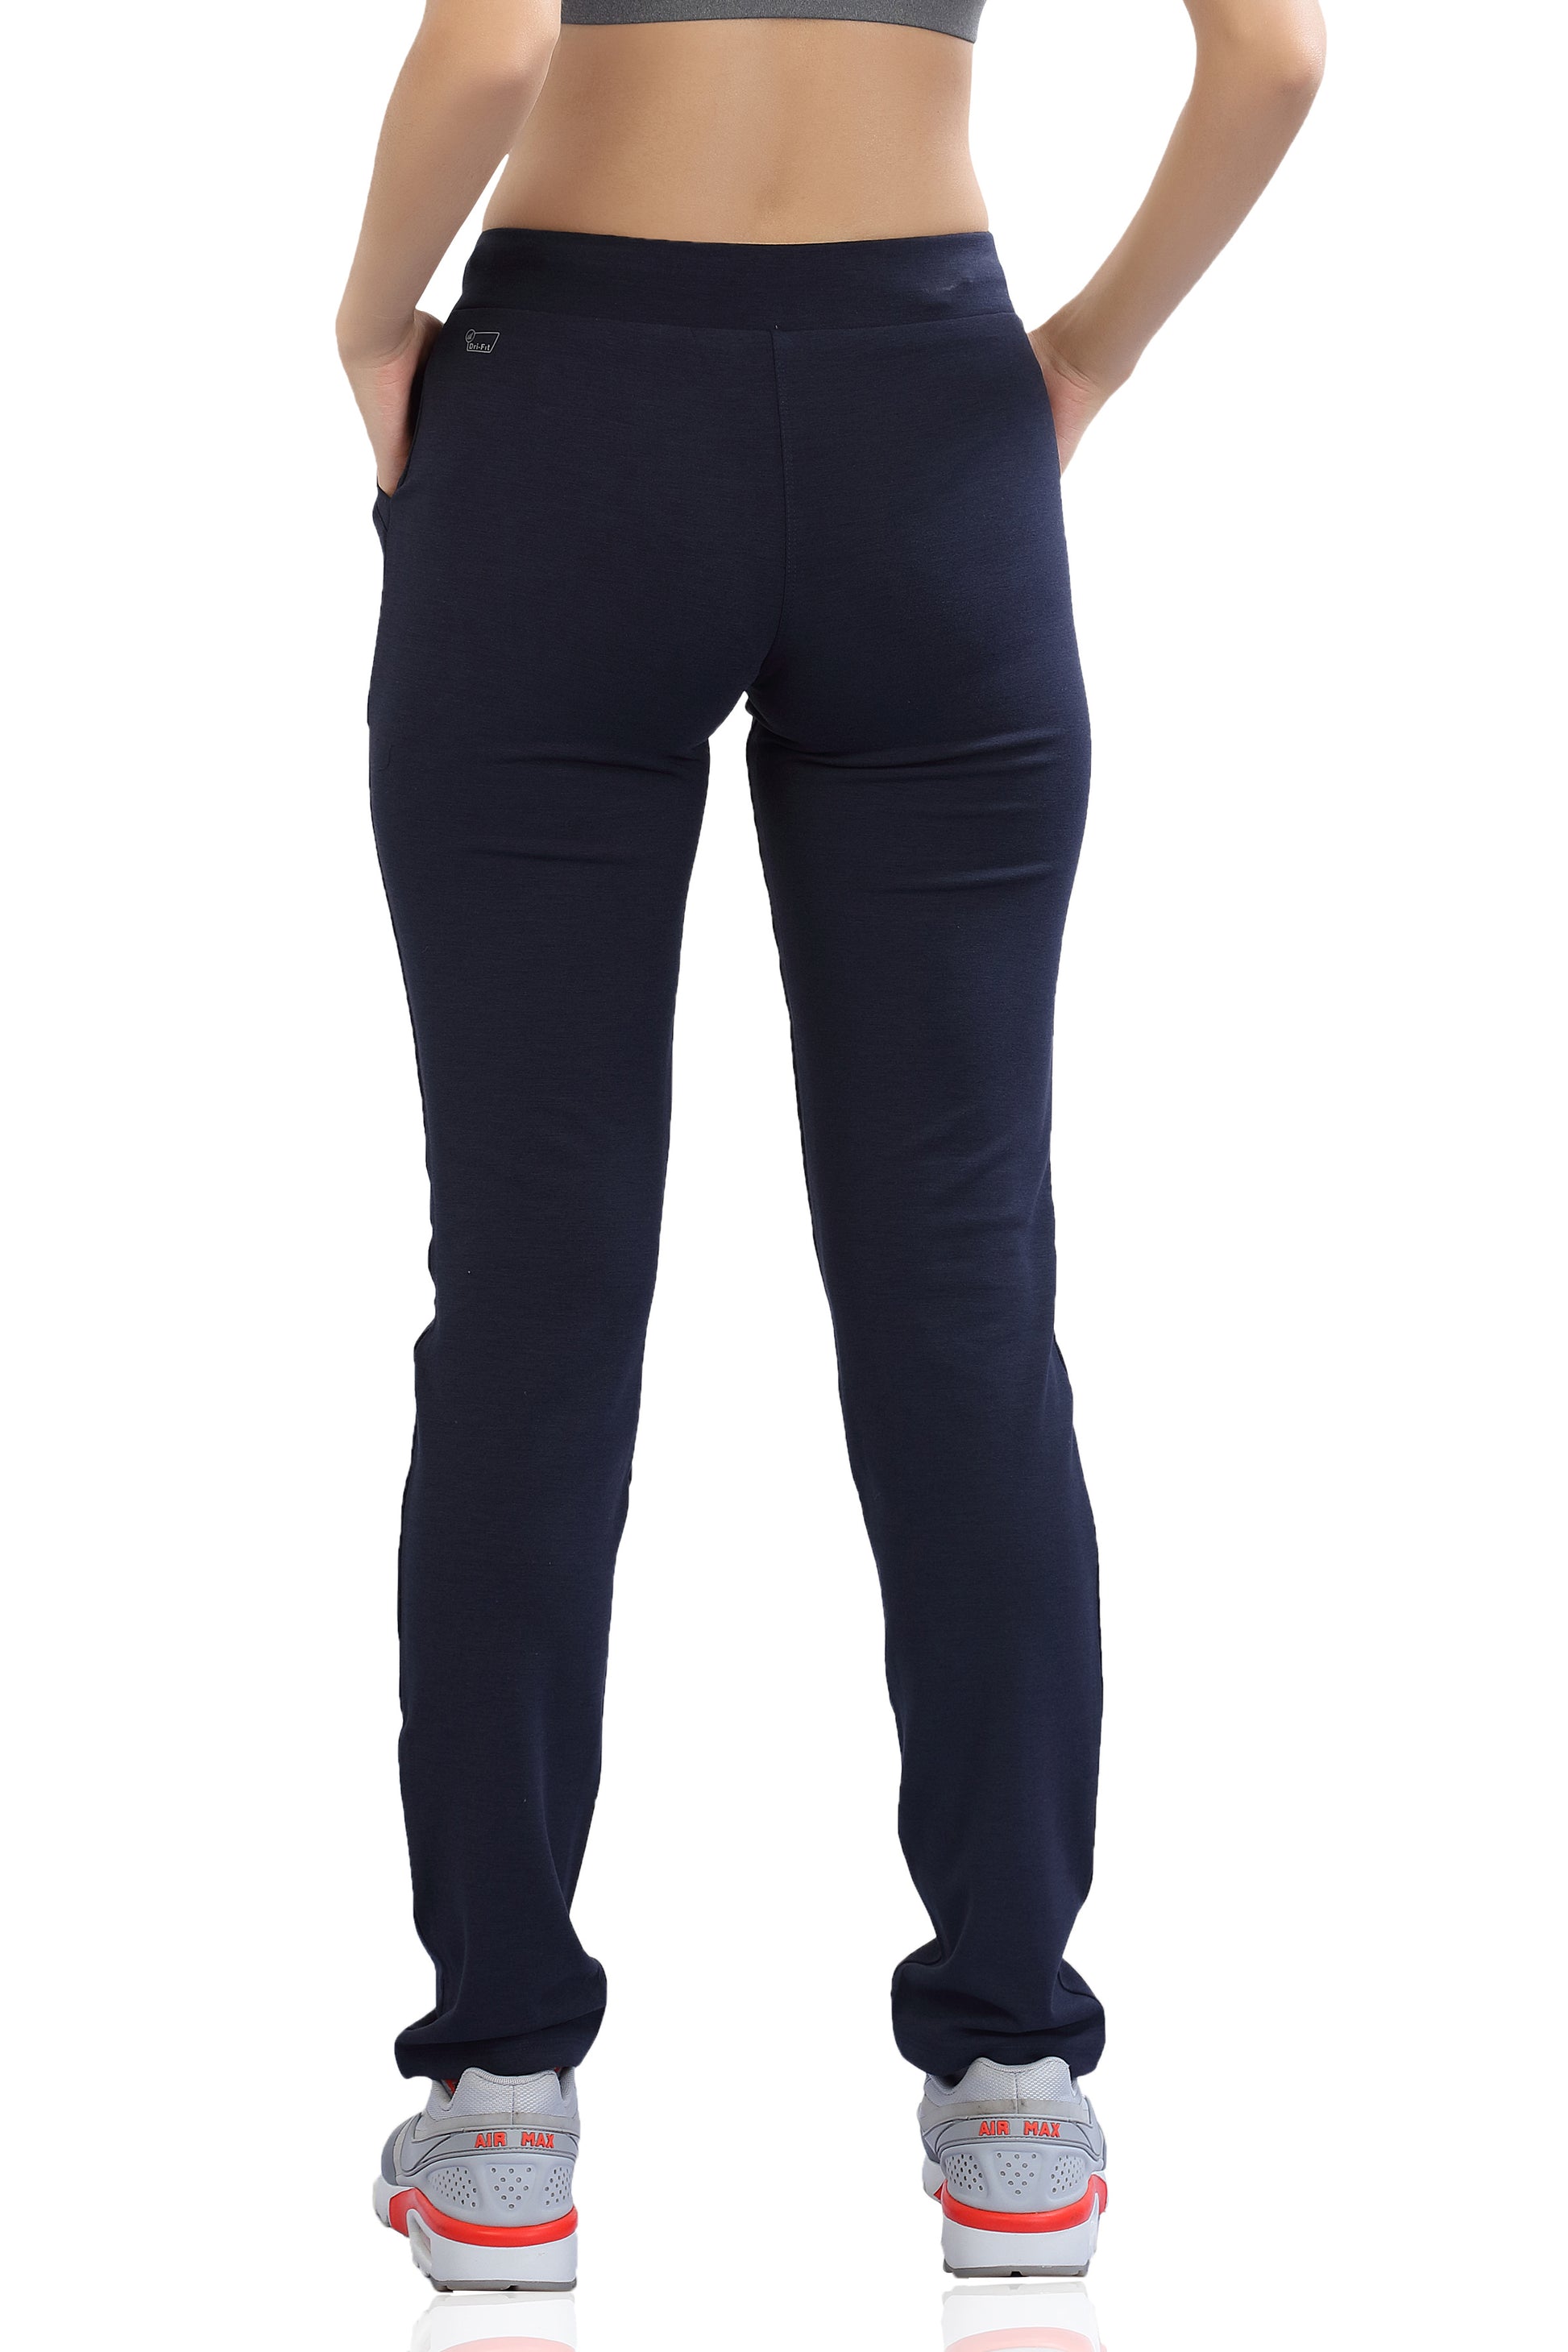 Cotton Plus Size Track Pants For Women - Regular Fit Lowers at Rs 670.00, Ladies  Track Pants